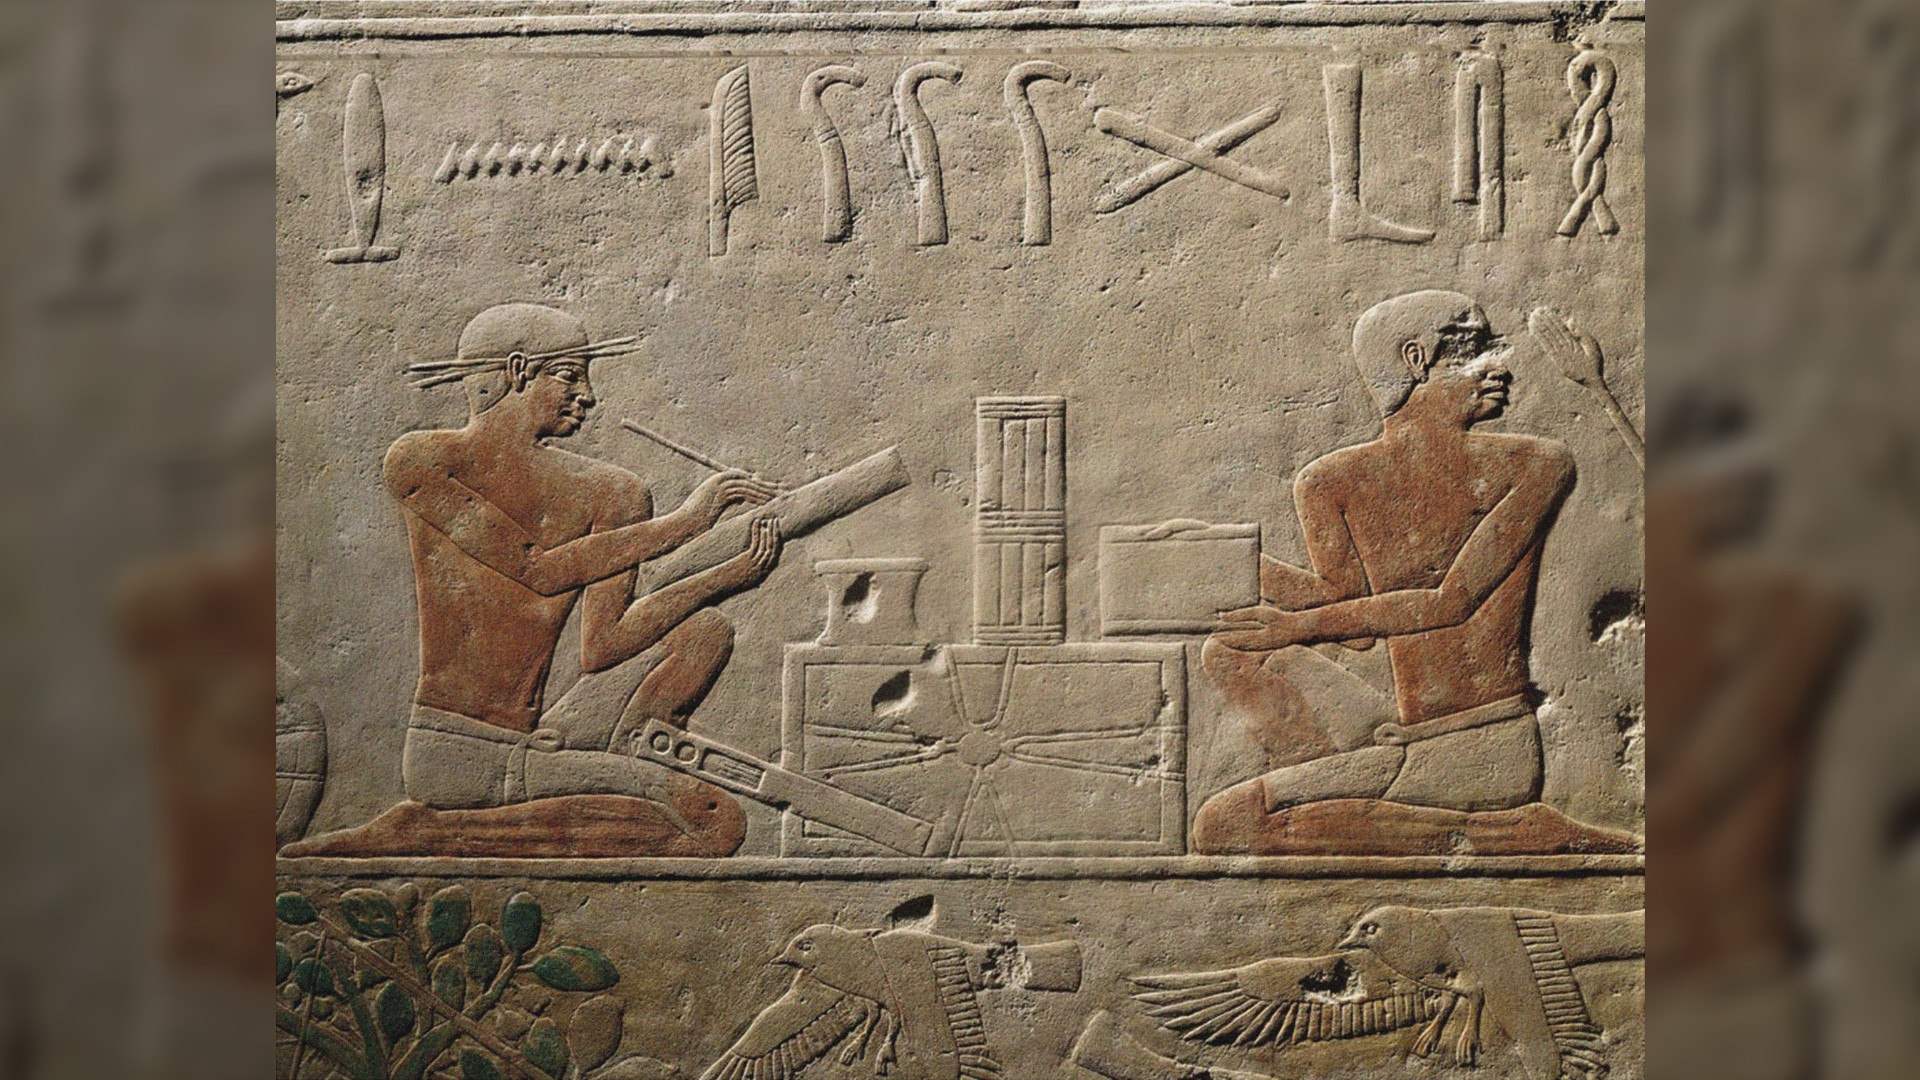 This is a relief from the mastaba of Akhthotep at Saqqara, Old Kingdom from about the Fifth Dynasty, circa 2494-2345 BC, here we see two scribes facing each other.  One writes on a tablet while the other holds some manuscripts.  Above them are numerous hieroglyphs, and below them are two images of flying birds.